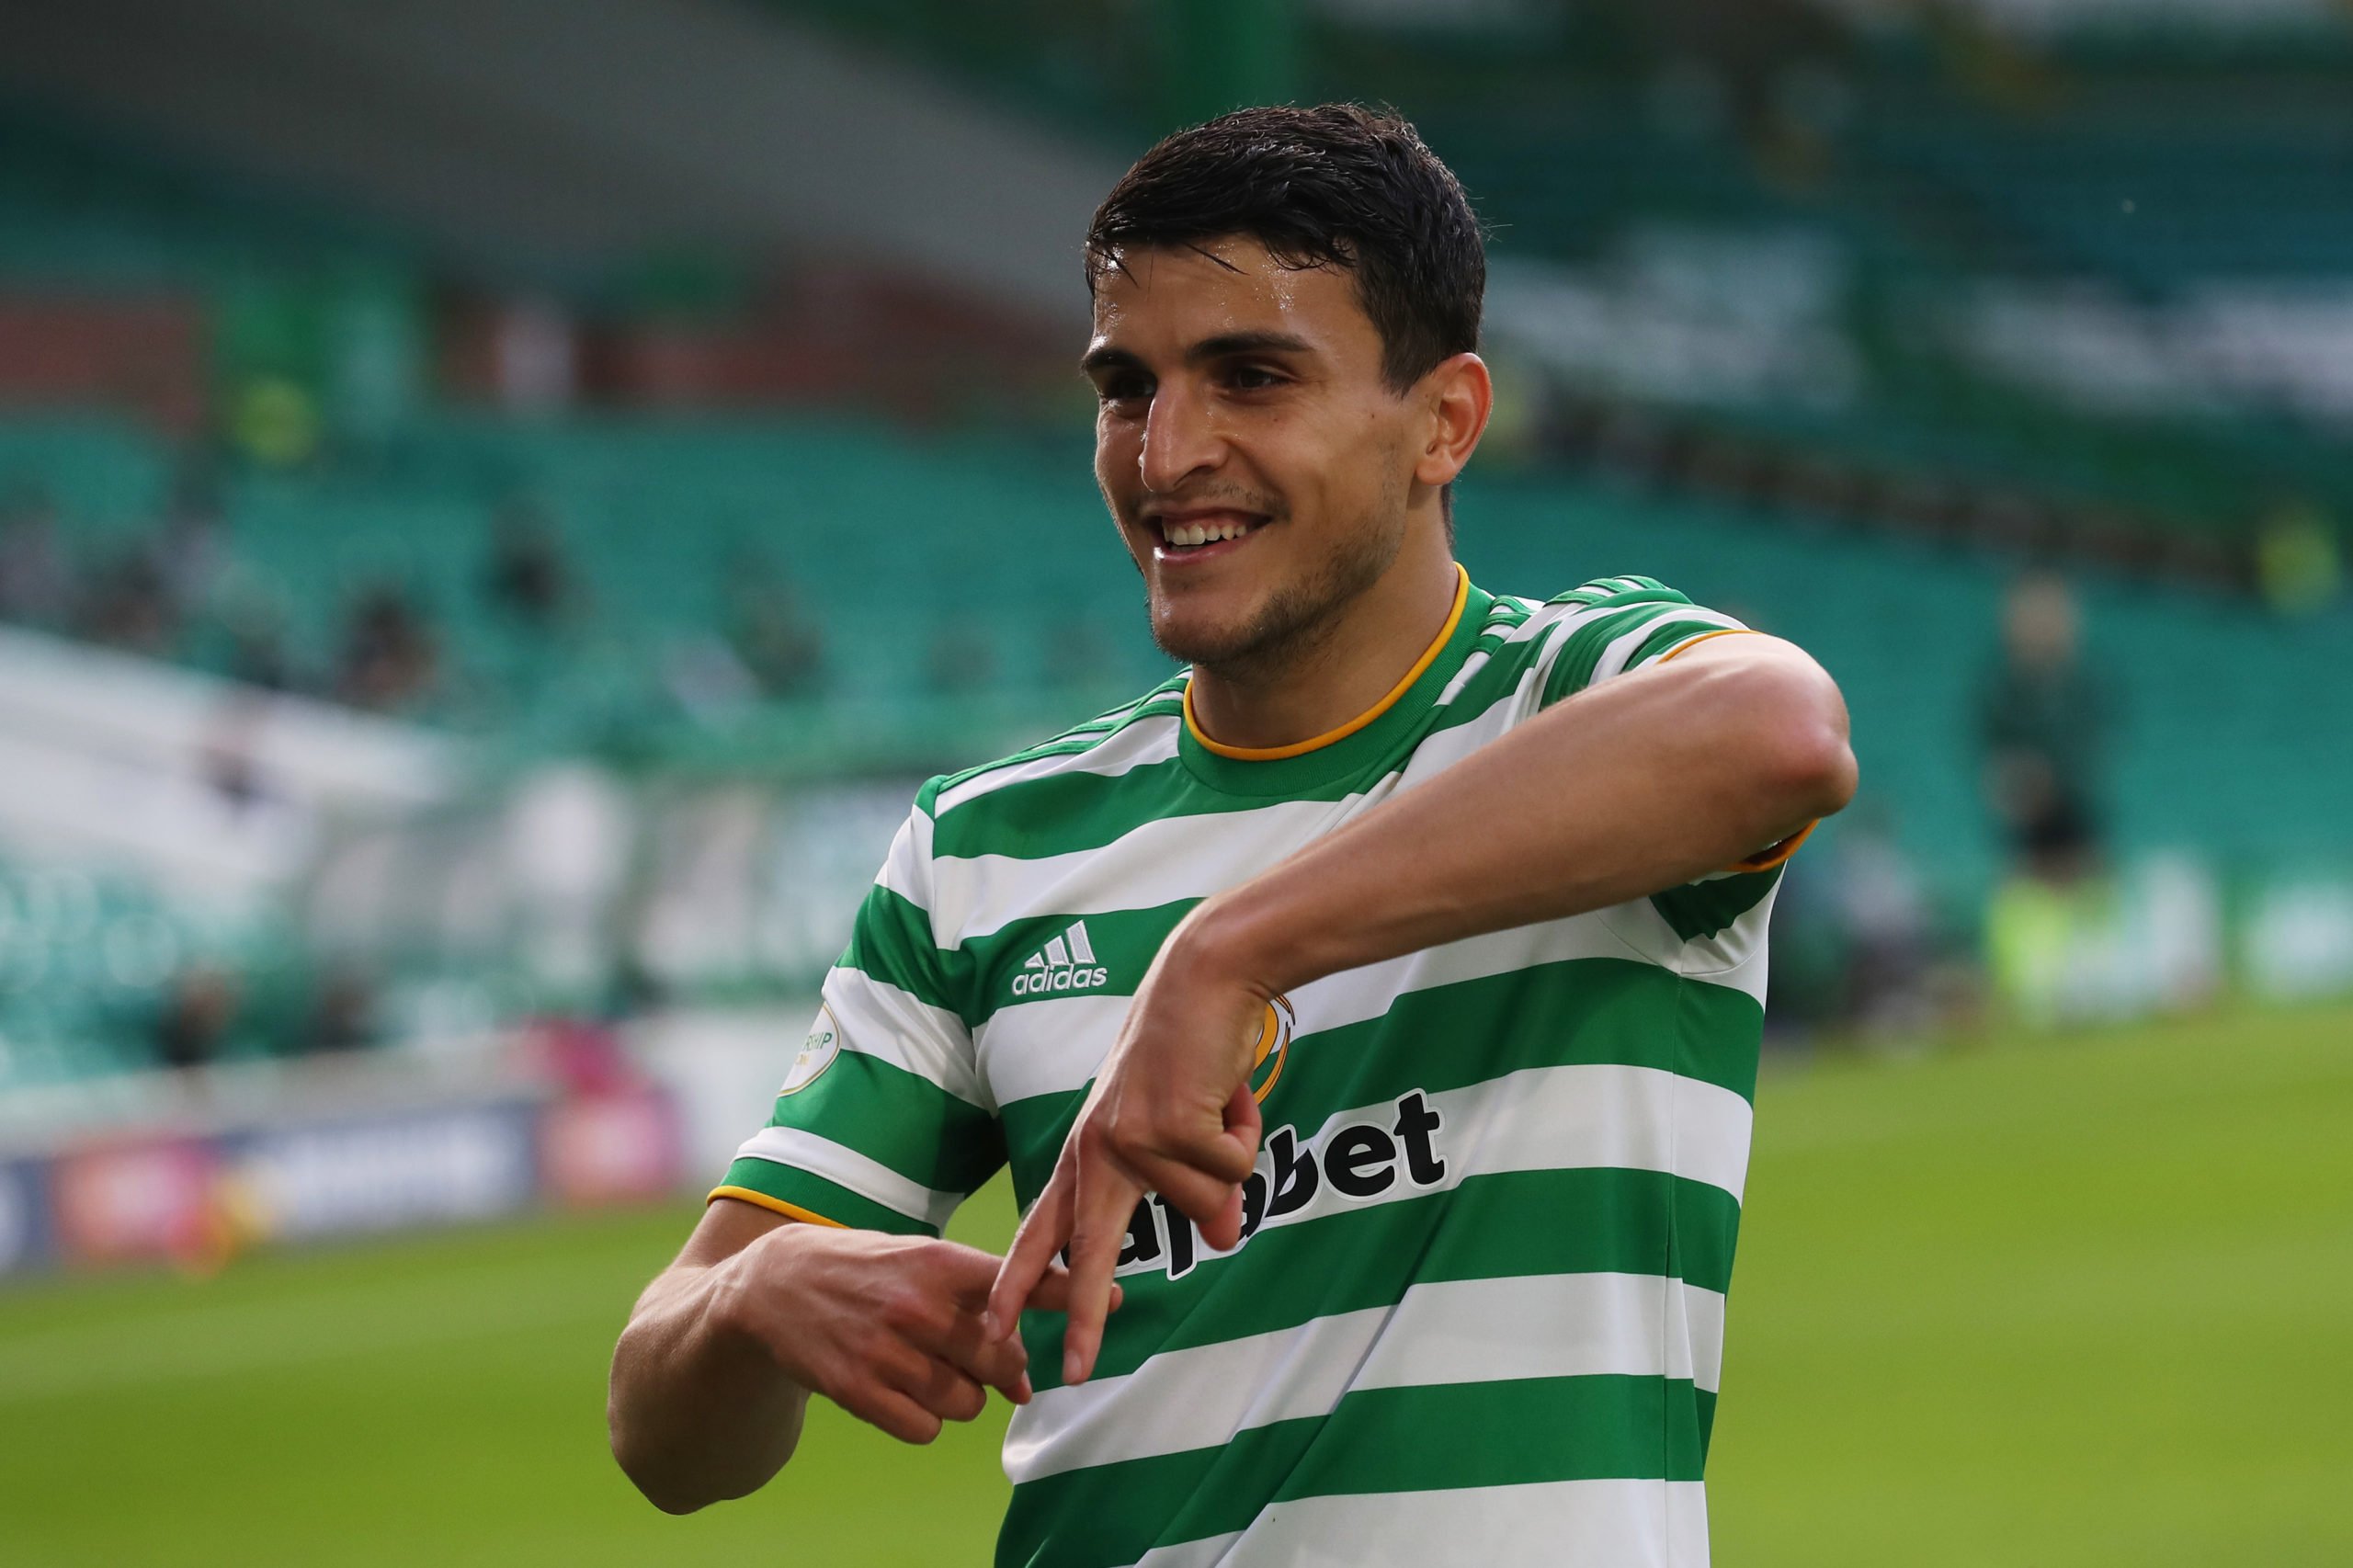 Hasenhuttl claims Celtic loan star Mohamed Elyounoussi likely to have "a chance" at Southampton